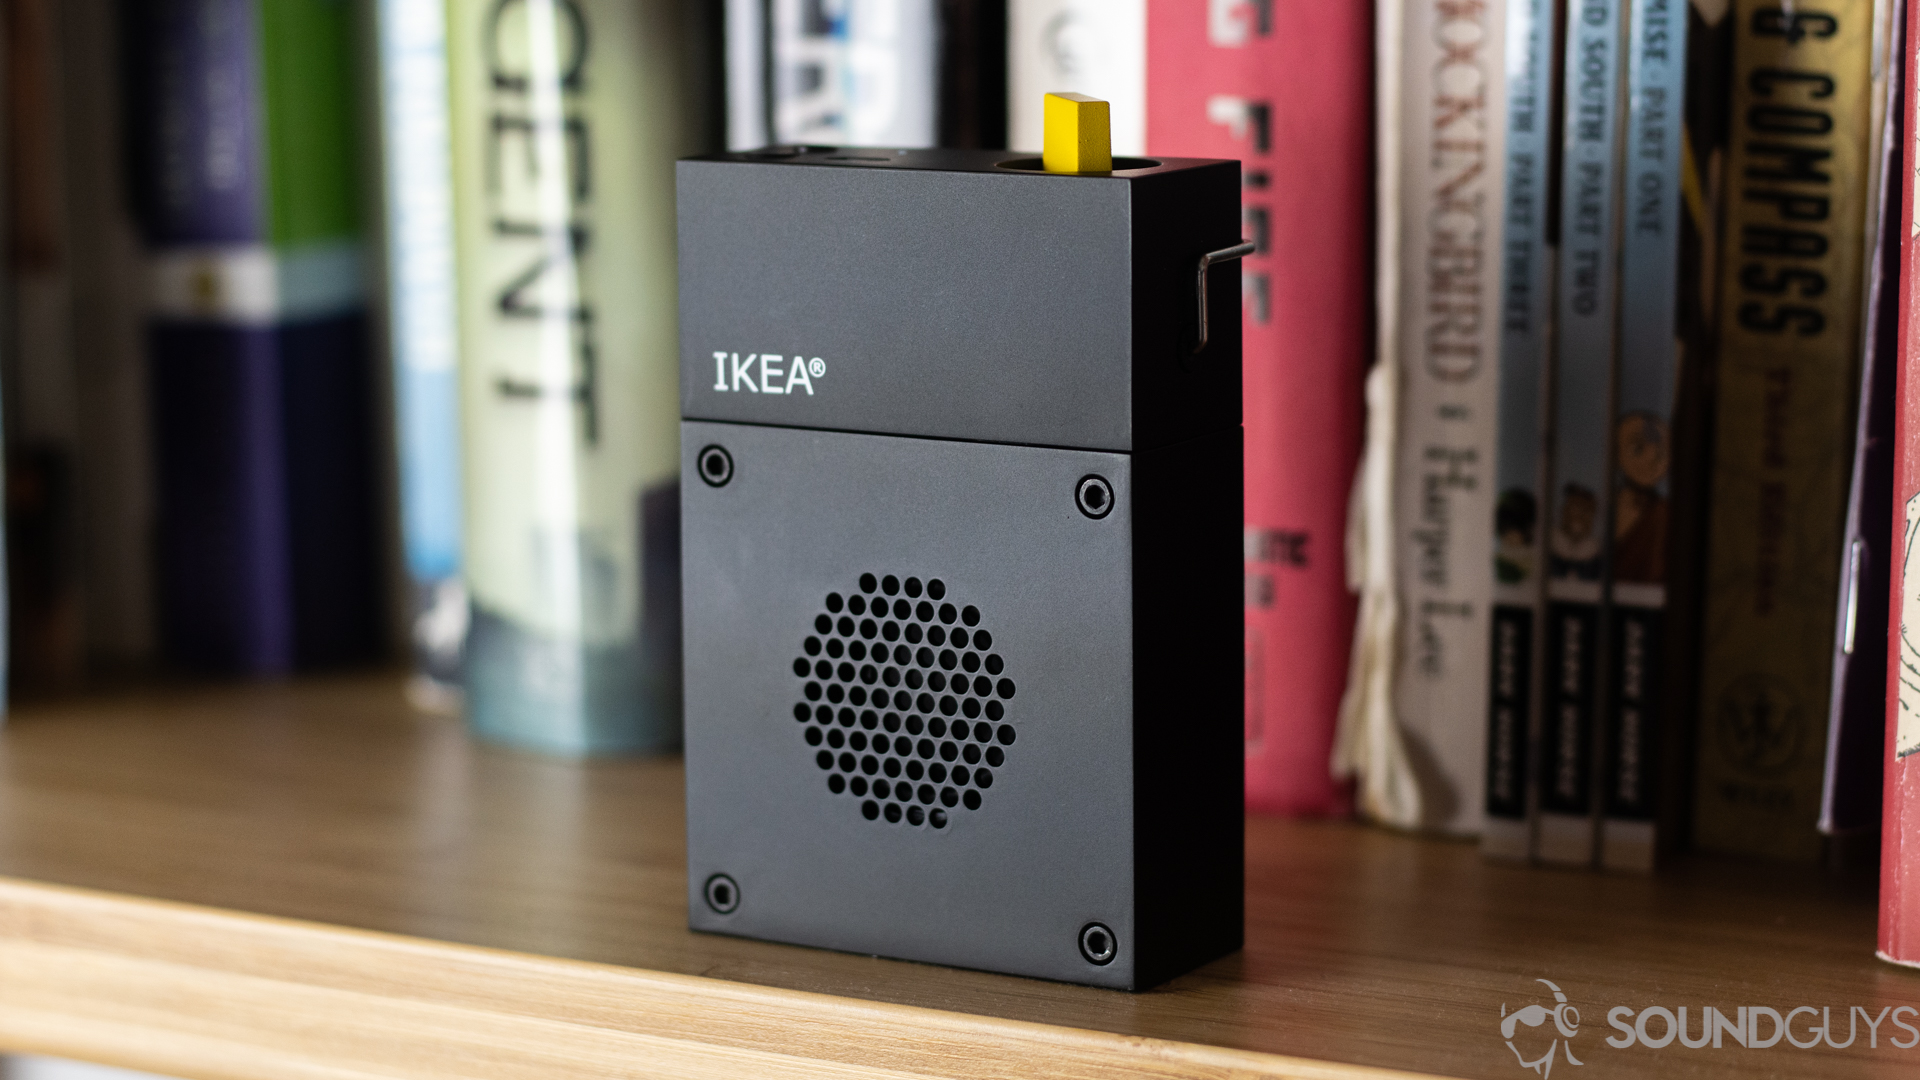 Pictured is the Frekvens Portable speaker on a shelf in front of books.